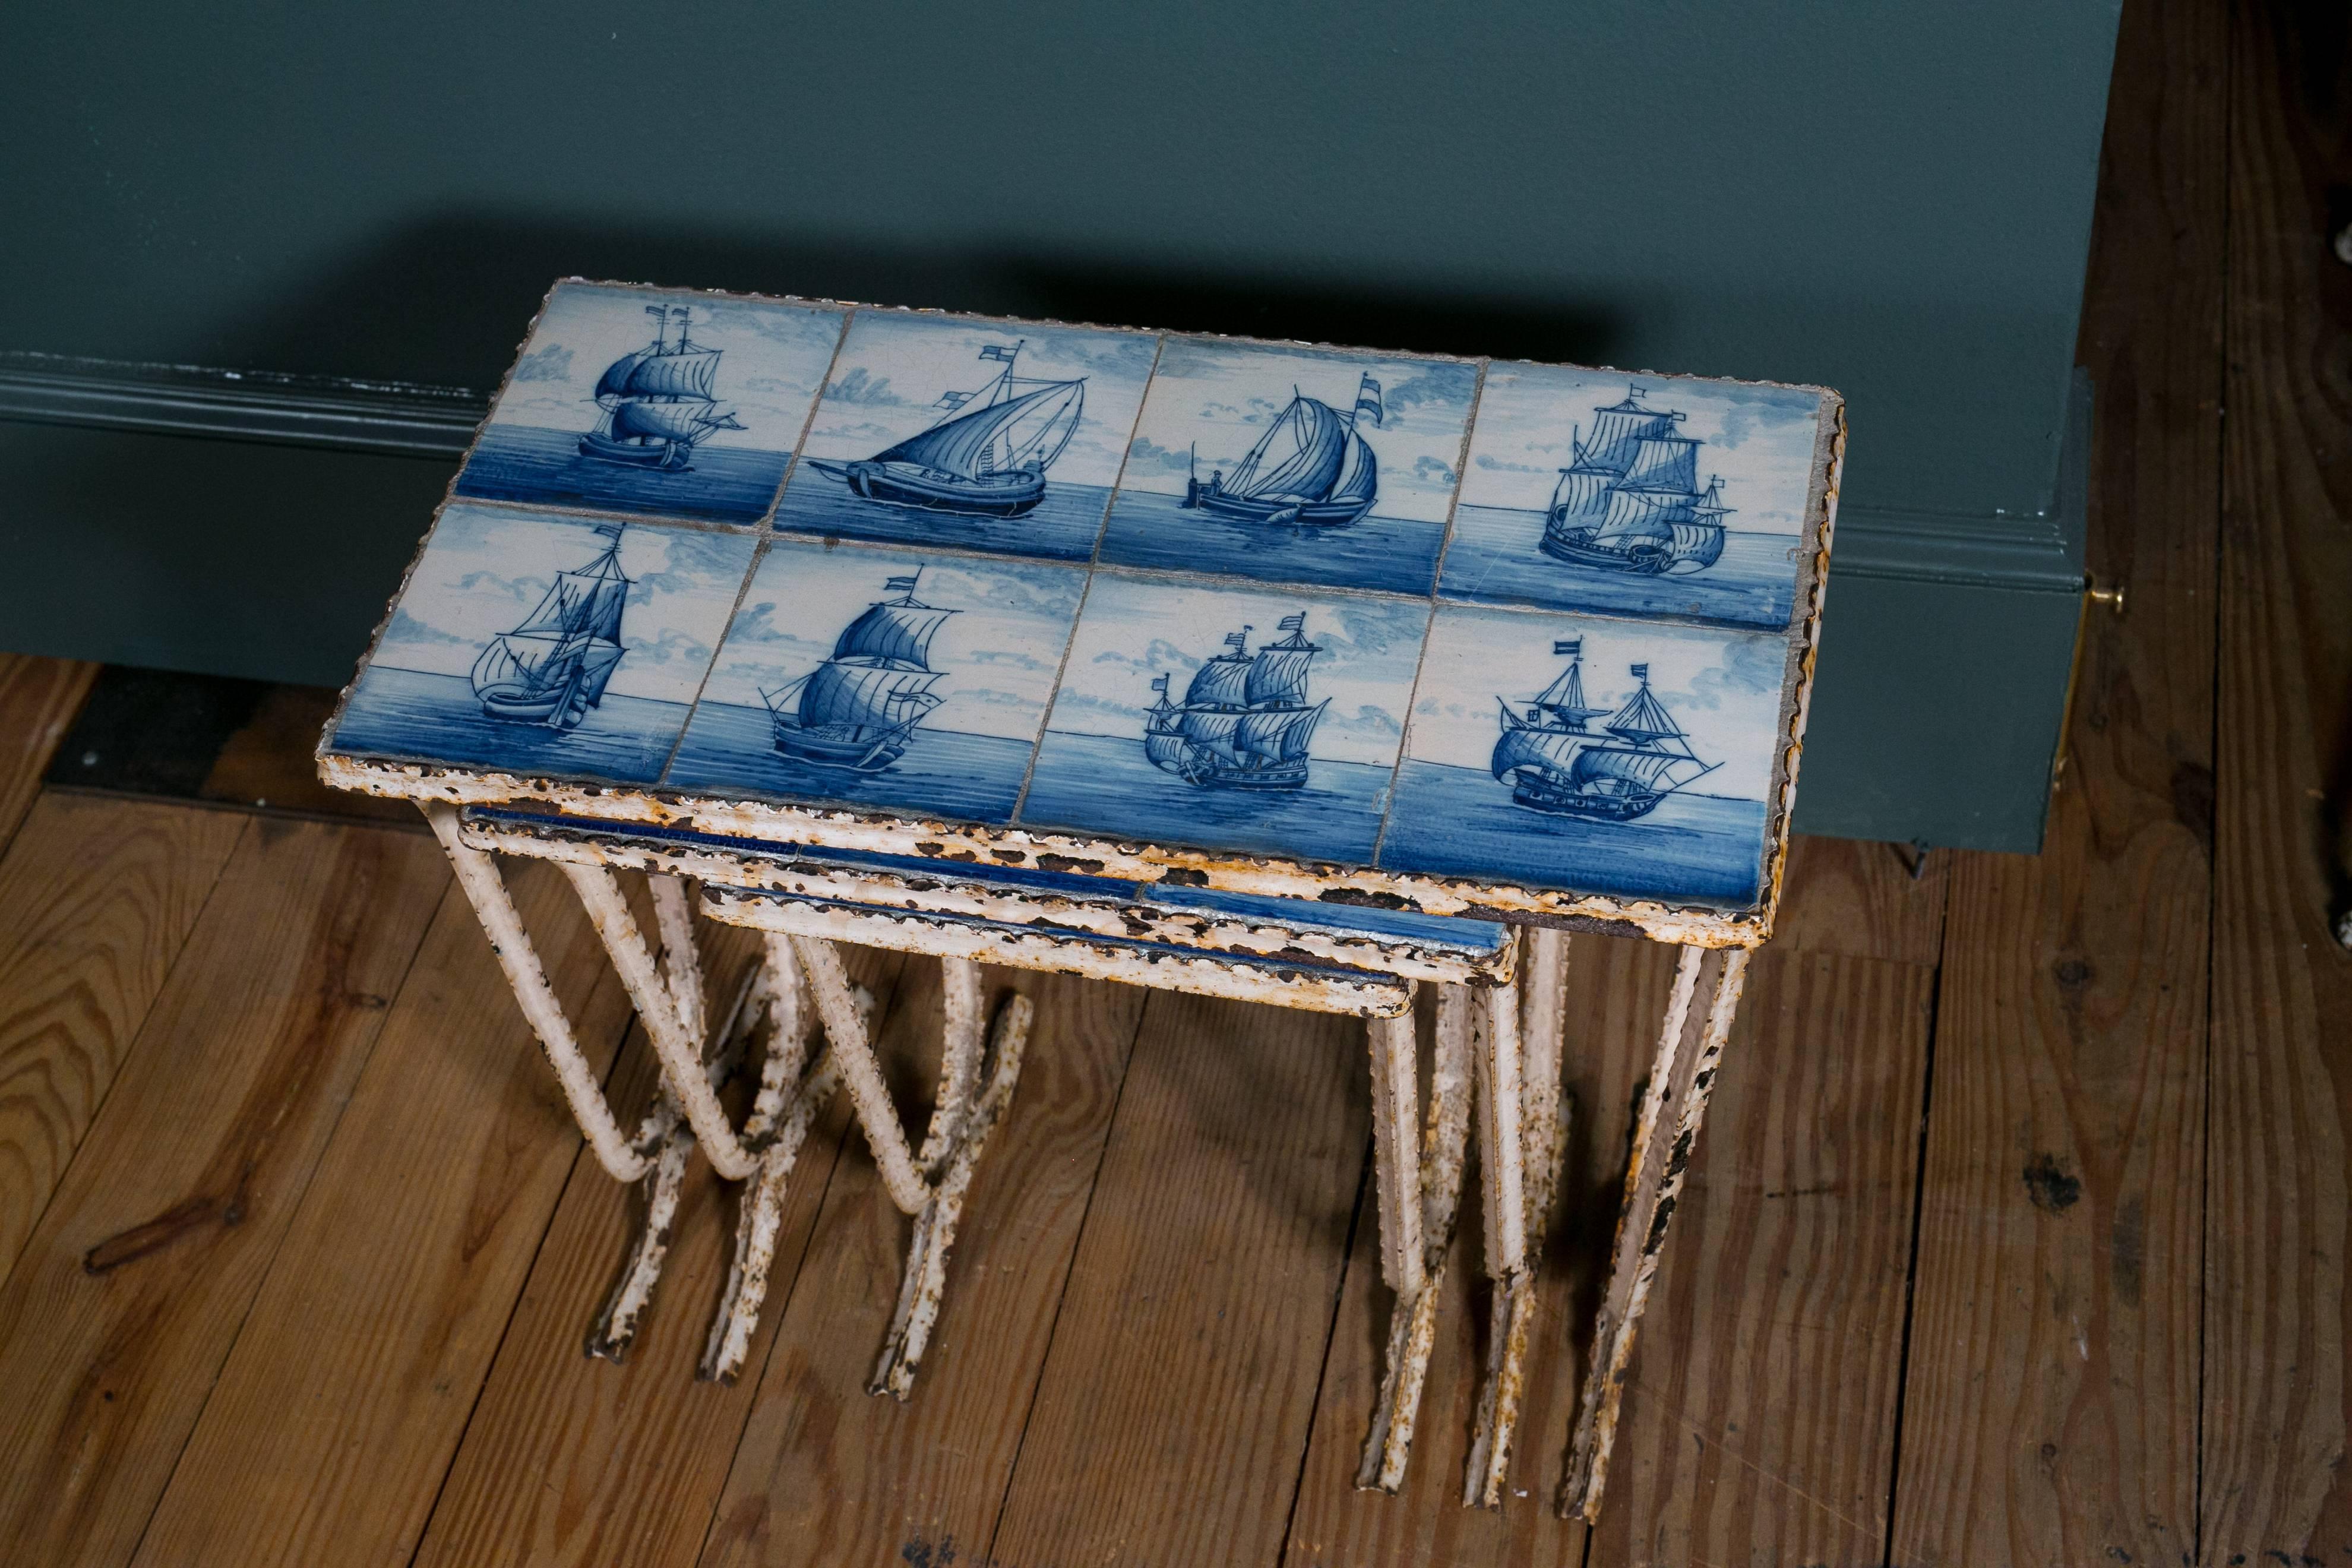 Set of three nesting tables with painted wrought iron bases and Delft blue and white tile tops. Sail boat scenes on each of the tiles. Measurement listed is for largest. Small measures 10.75 inches square x 15.5 inches H. Medium measures 16 inches L